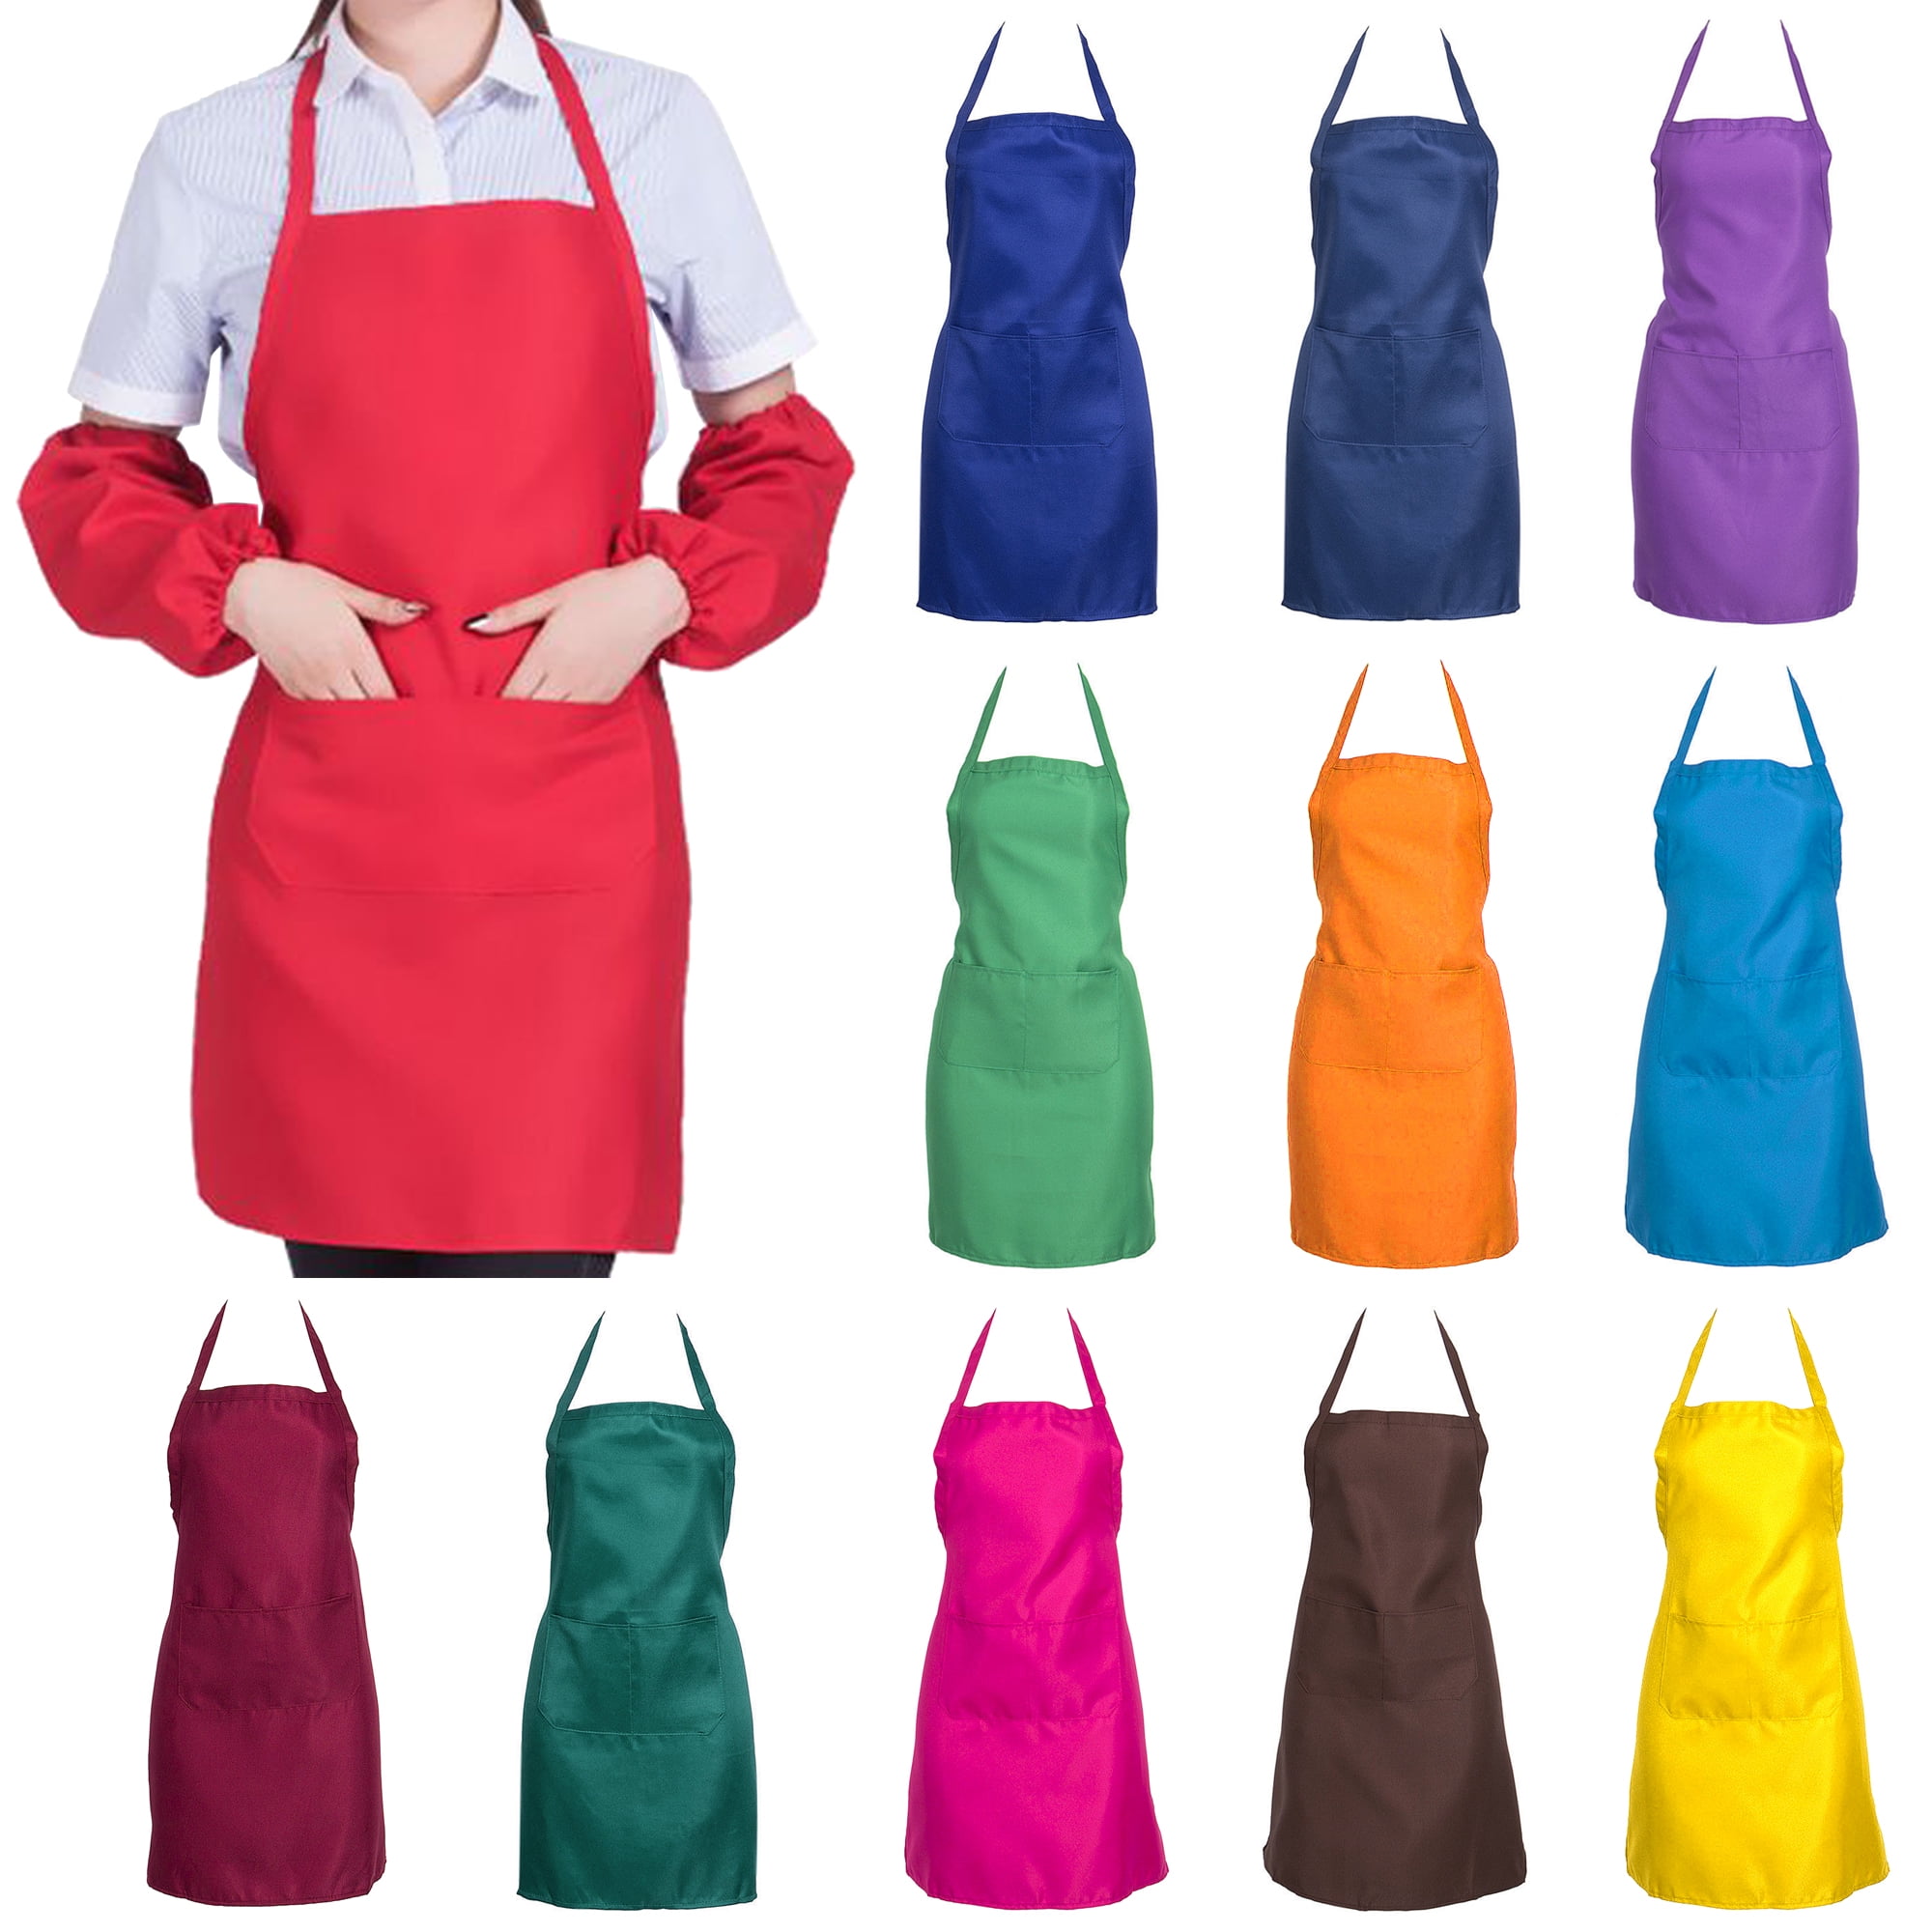 NEW LADIES TABARD TABBARD APRON WITH POCKET PLUS SIZE KITCHEN CLEANING ROYAL BLU 